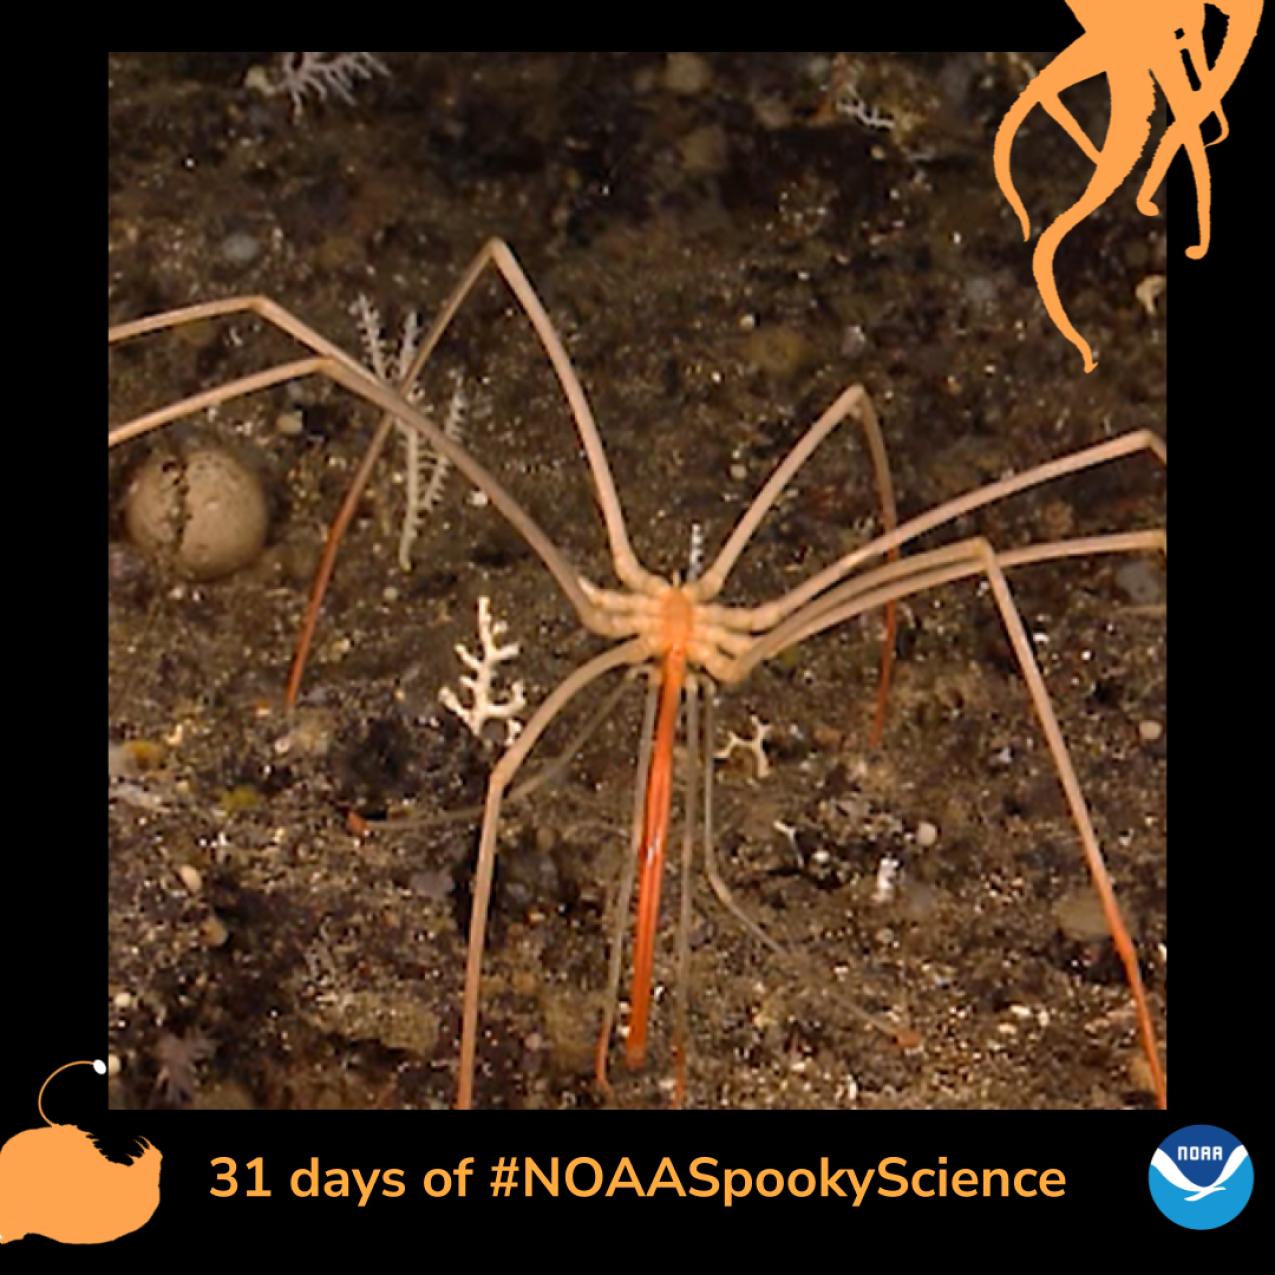 A sea spider, which has eight long legs. Border of the photo is black with orange sea creature graphics of octopus tentacles and an anglerfish. Text: 31 days of #NOAASpookyScience